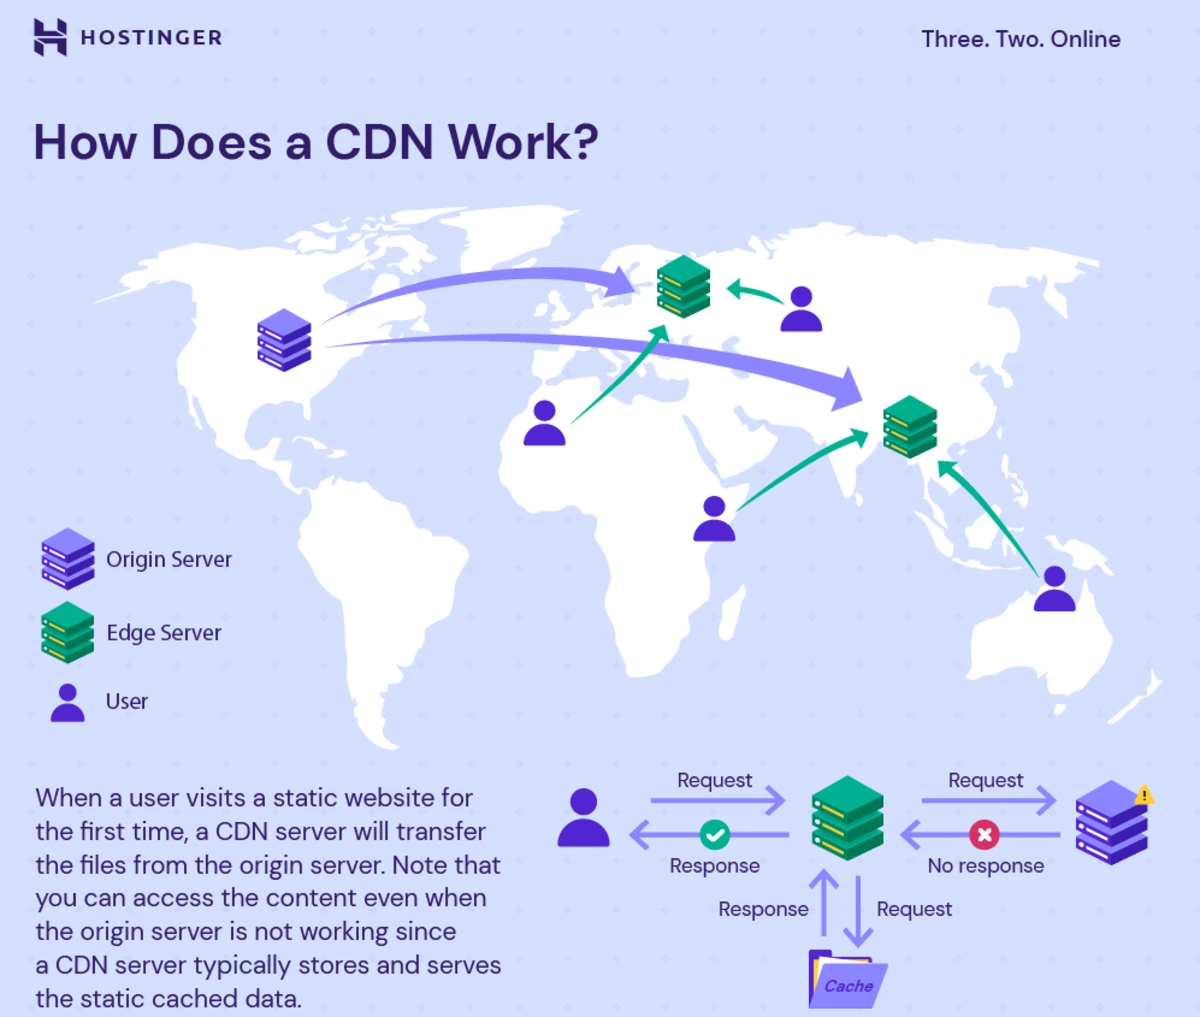 how does a cdn work from hostinger